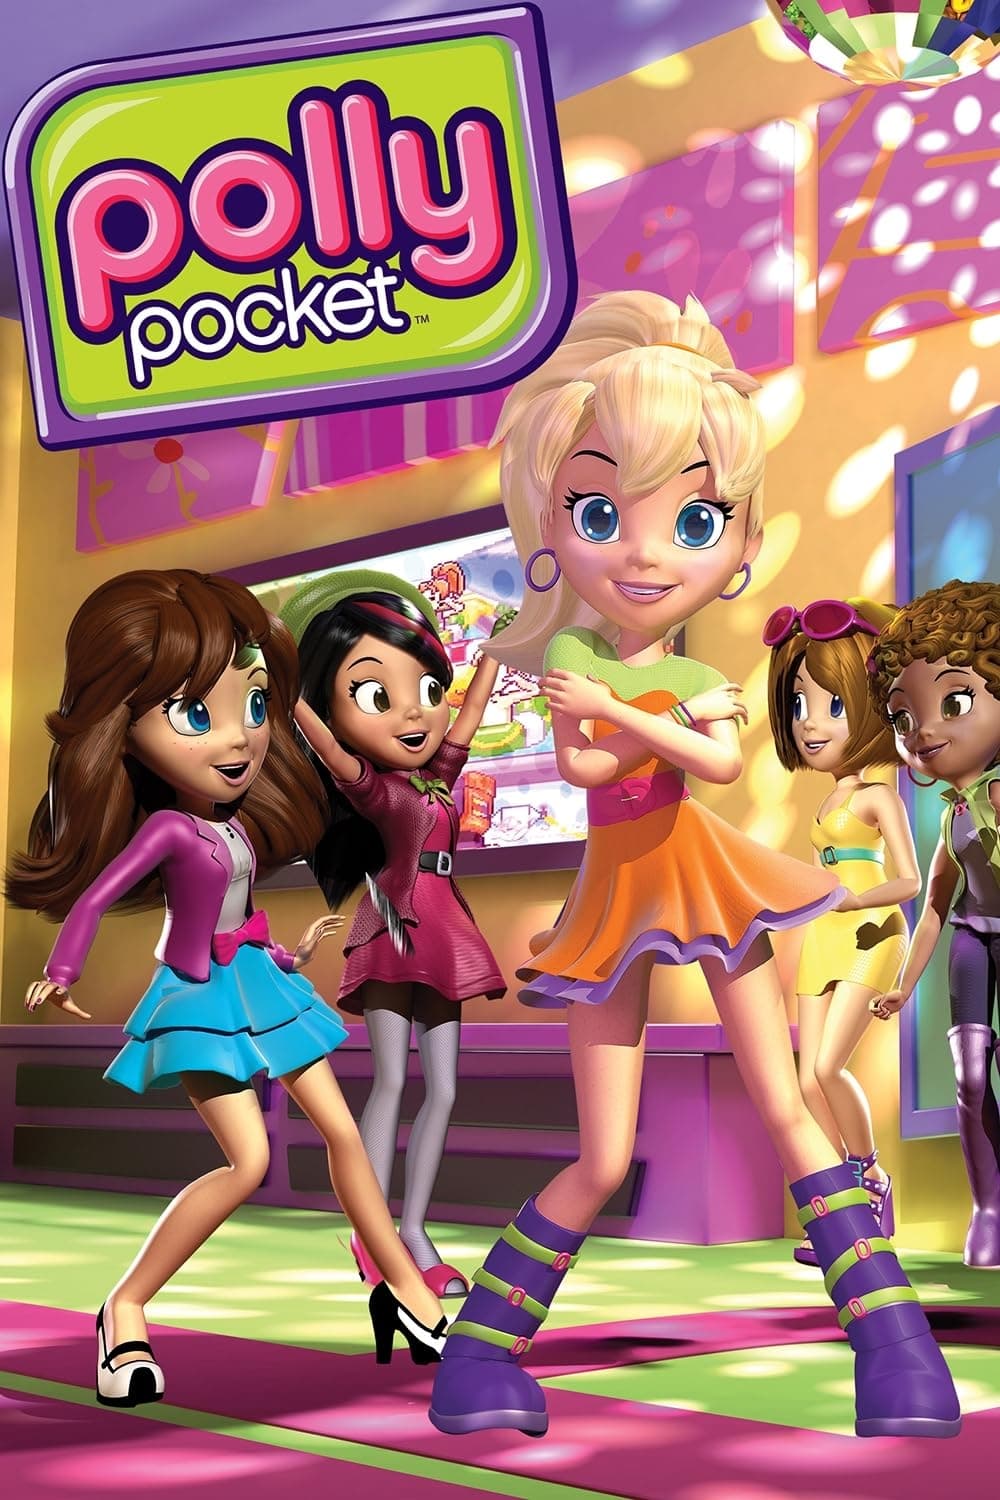 Polly Pocket Friends Finish First